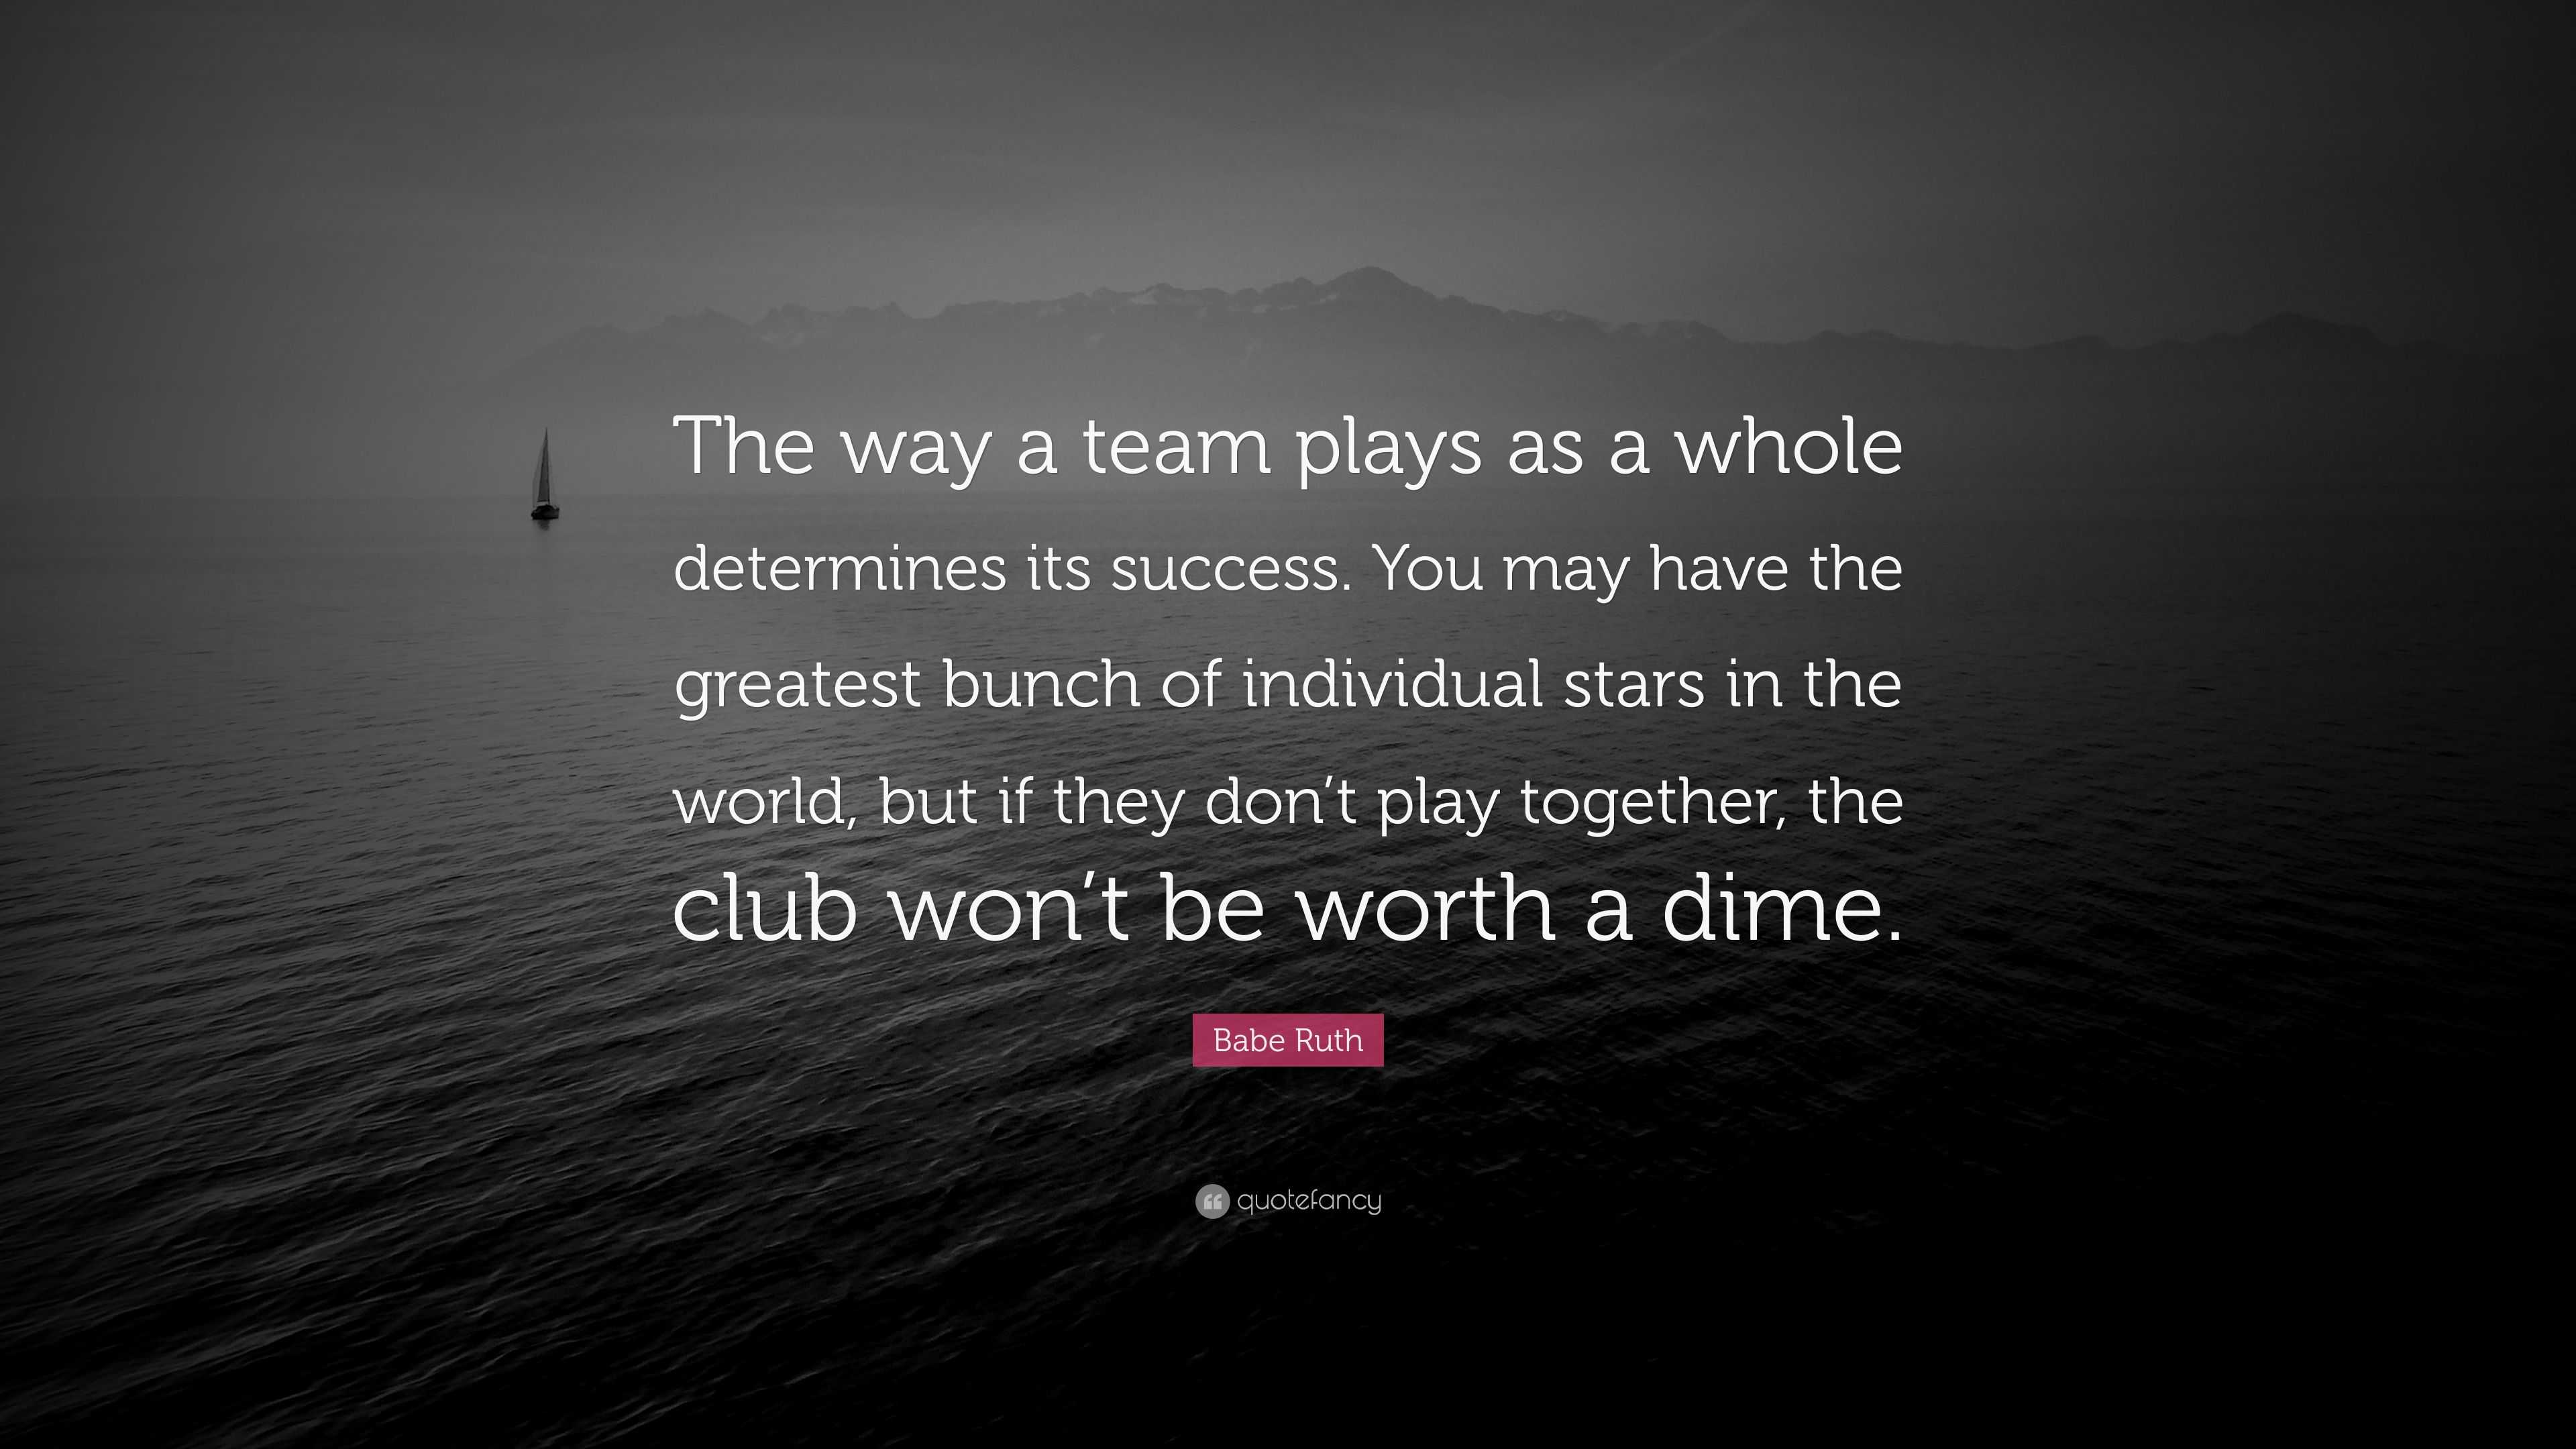 Babe Ruth Quote: “The way a team plays as a whole determines its ...